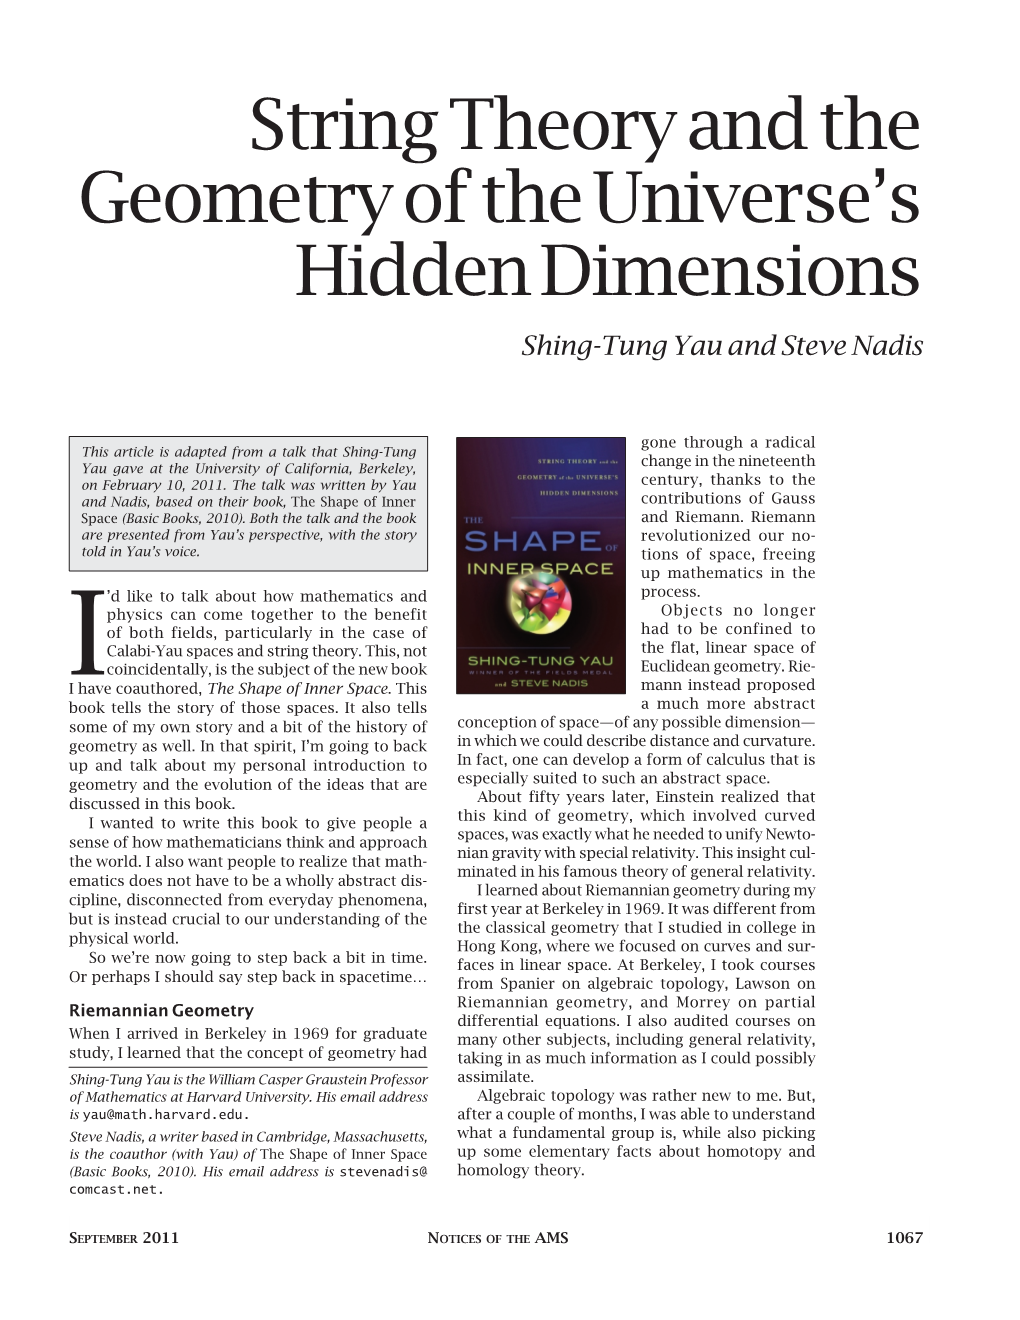 String Theory and the Geometry of the Universe's Hidden Dimensions